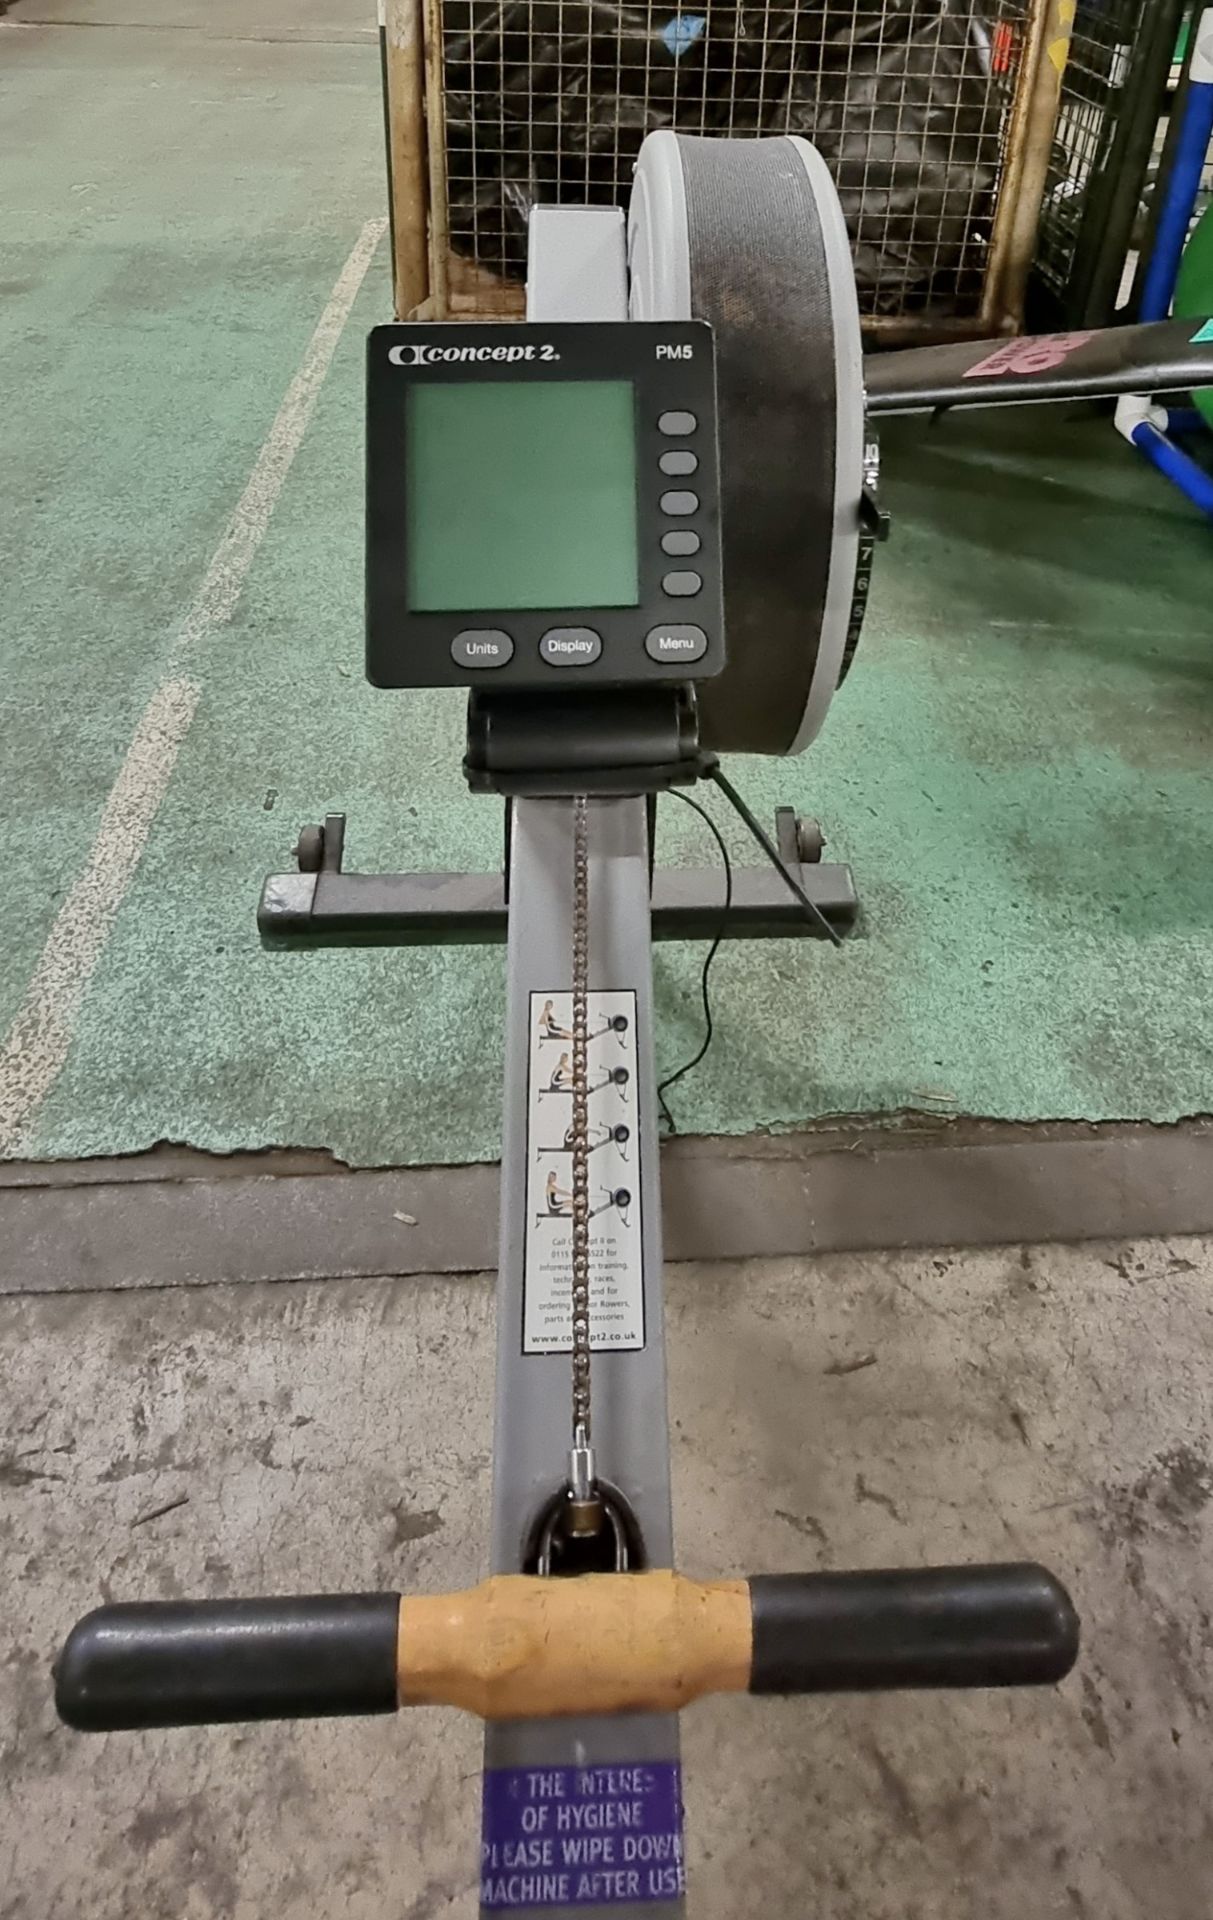 Concept 2 indoor rowing machine with PM5 display unit - Image 3 of 7